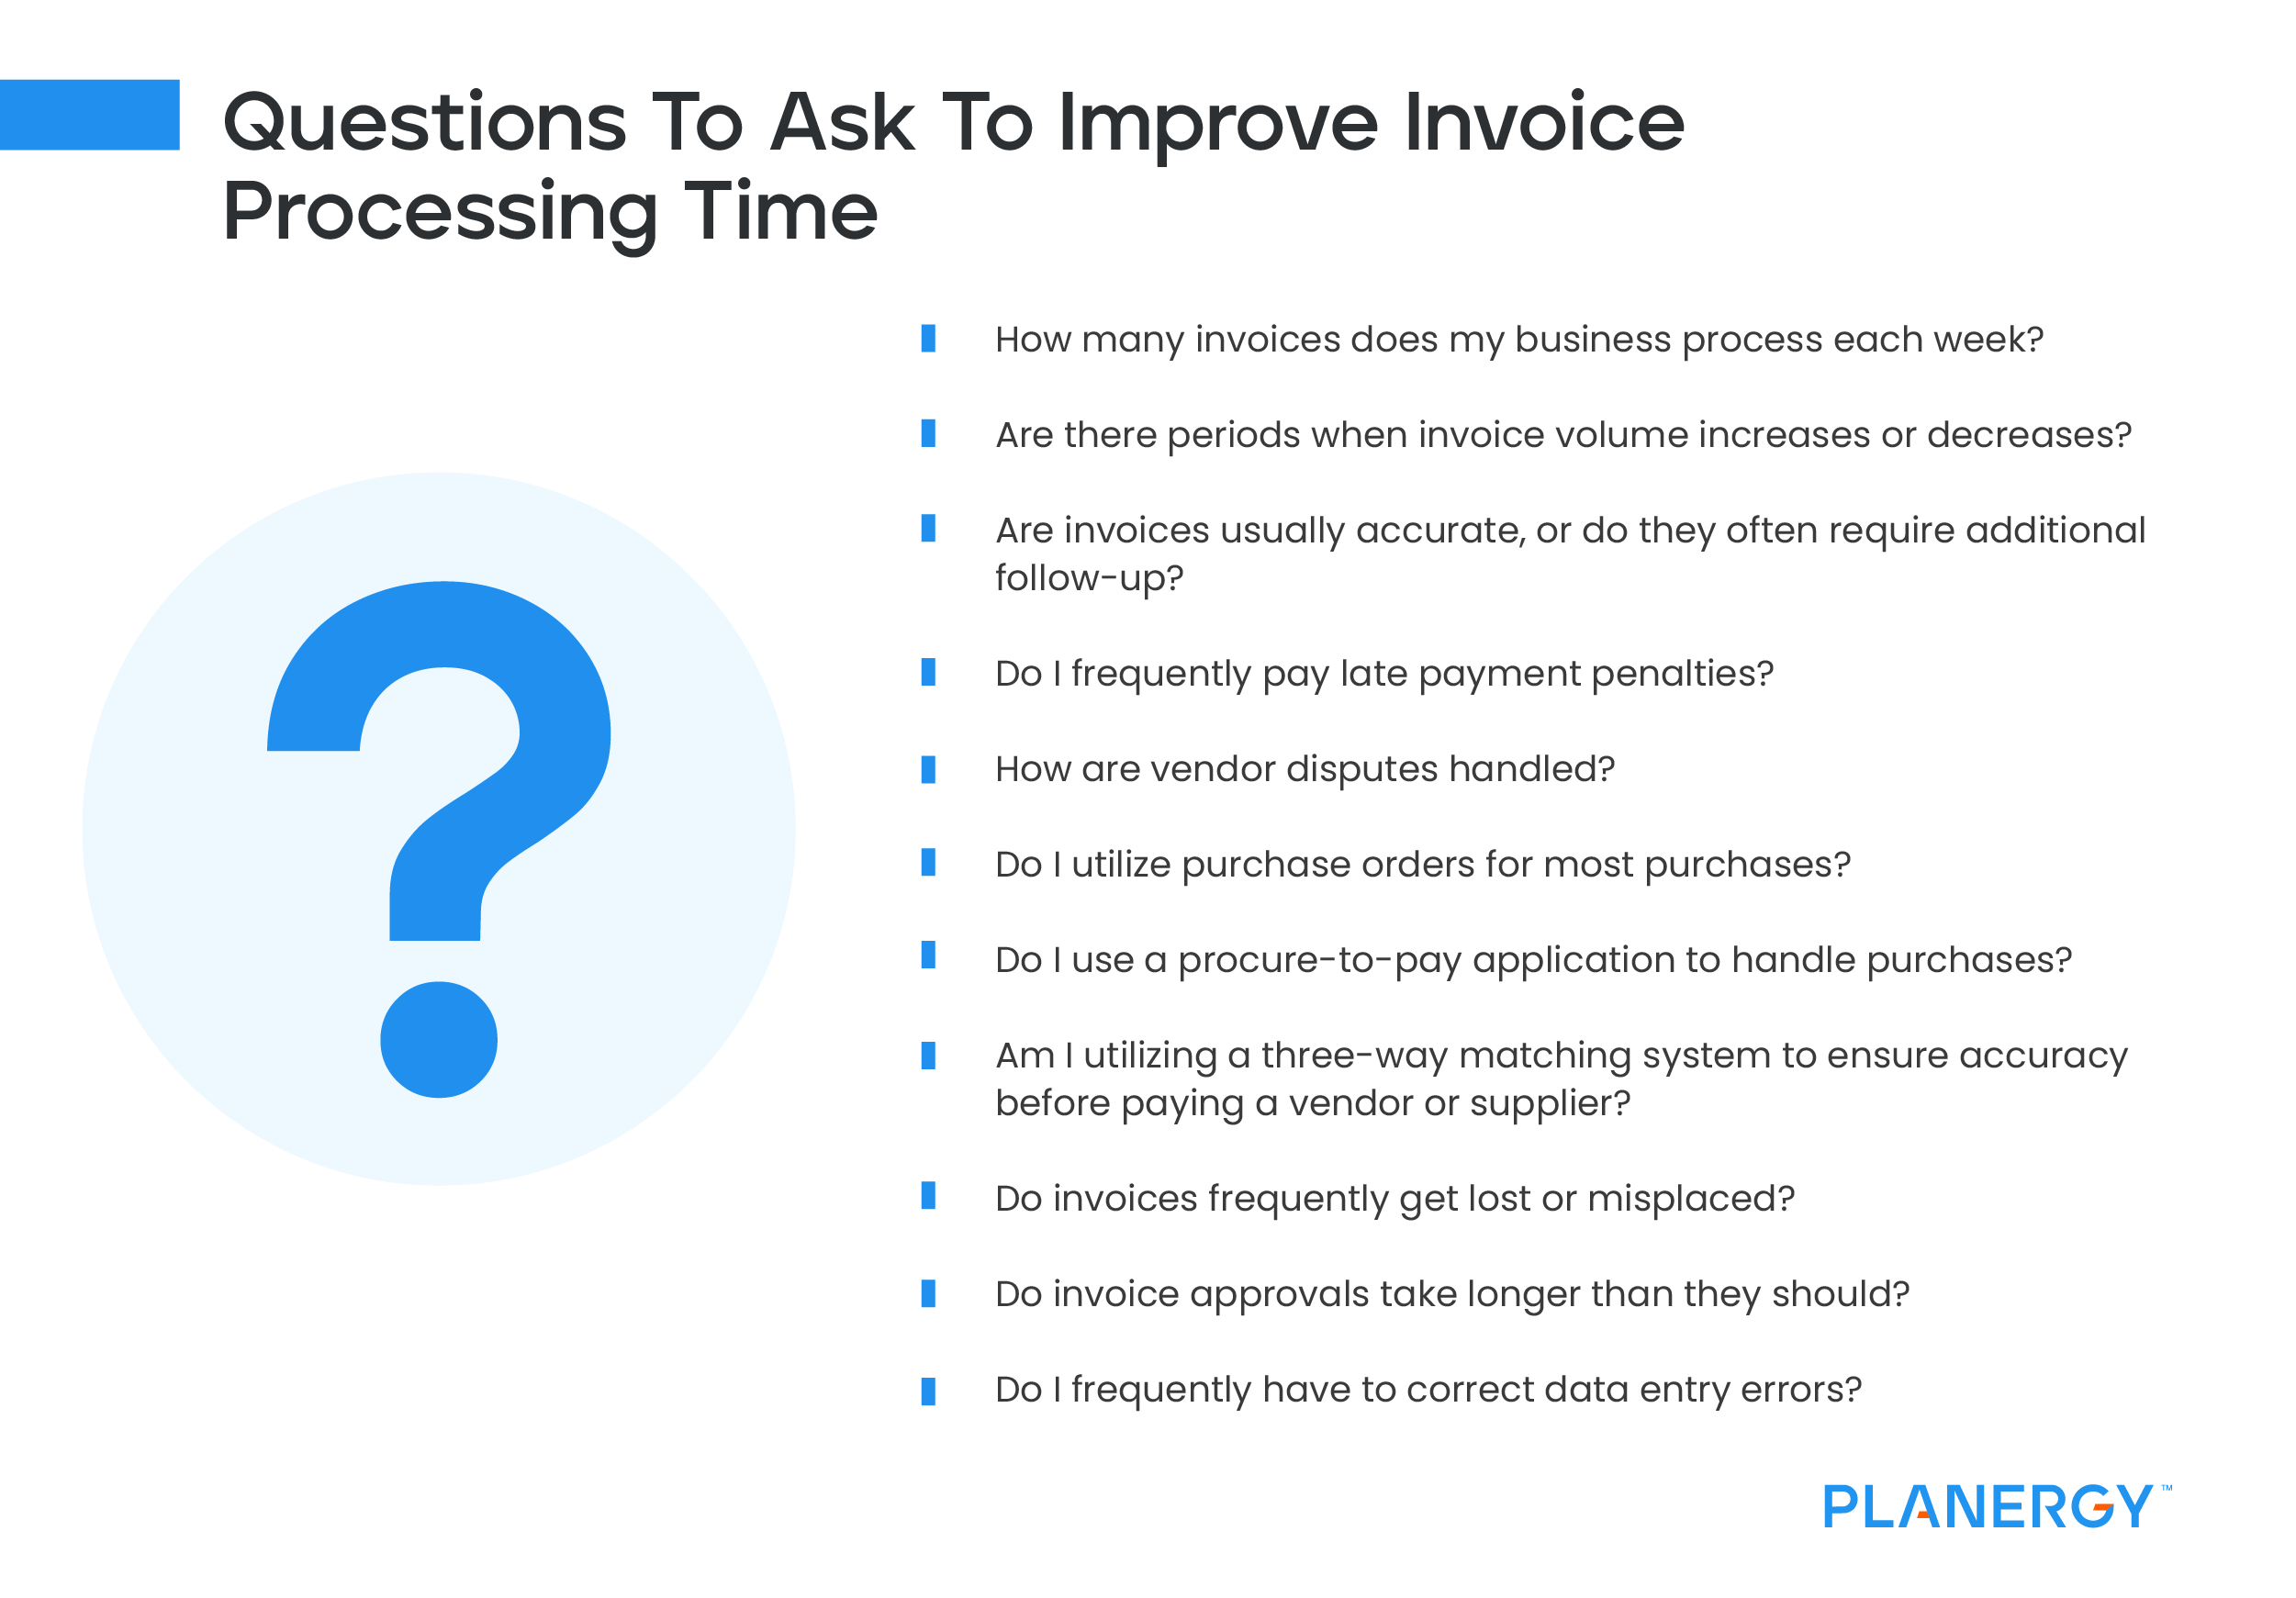 Questions to Ask to Improve Invoice Processing Time